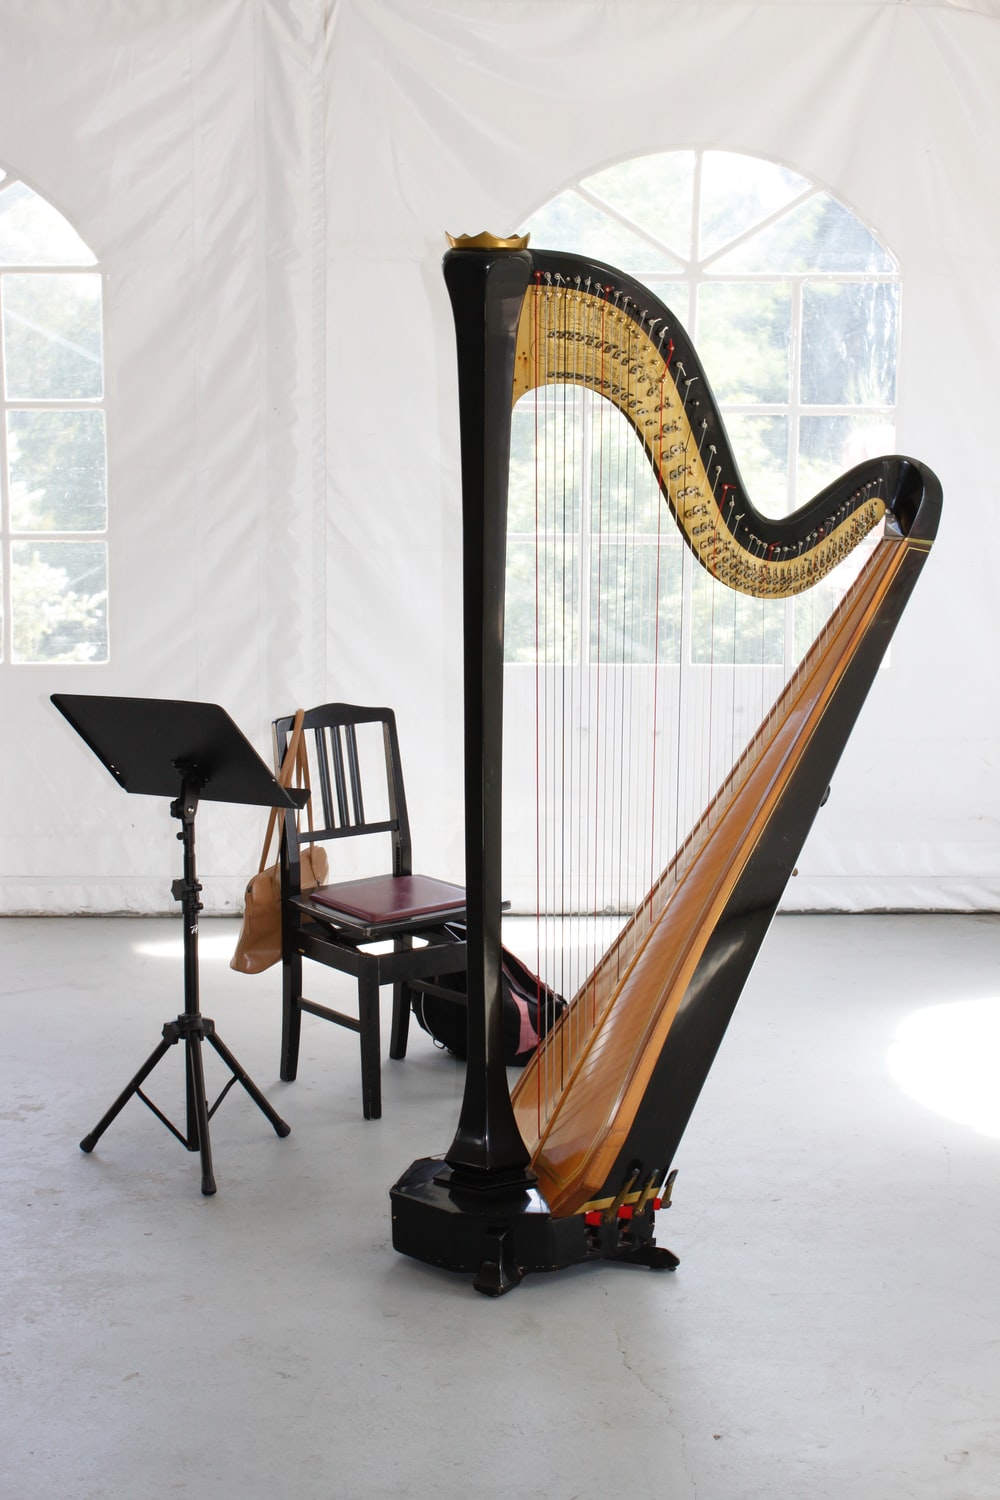 Detail Picture Of A Harp Nomer 5